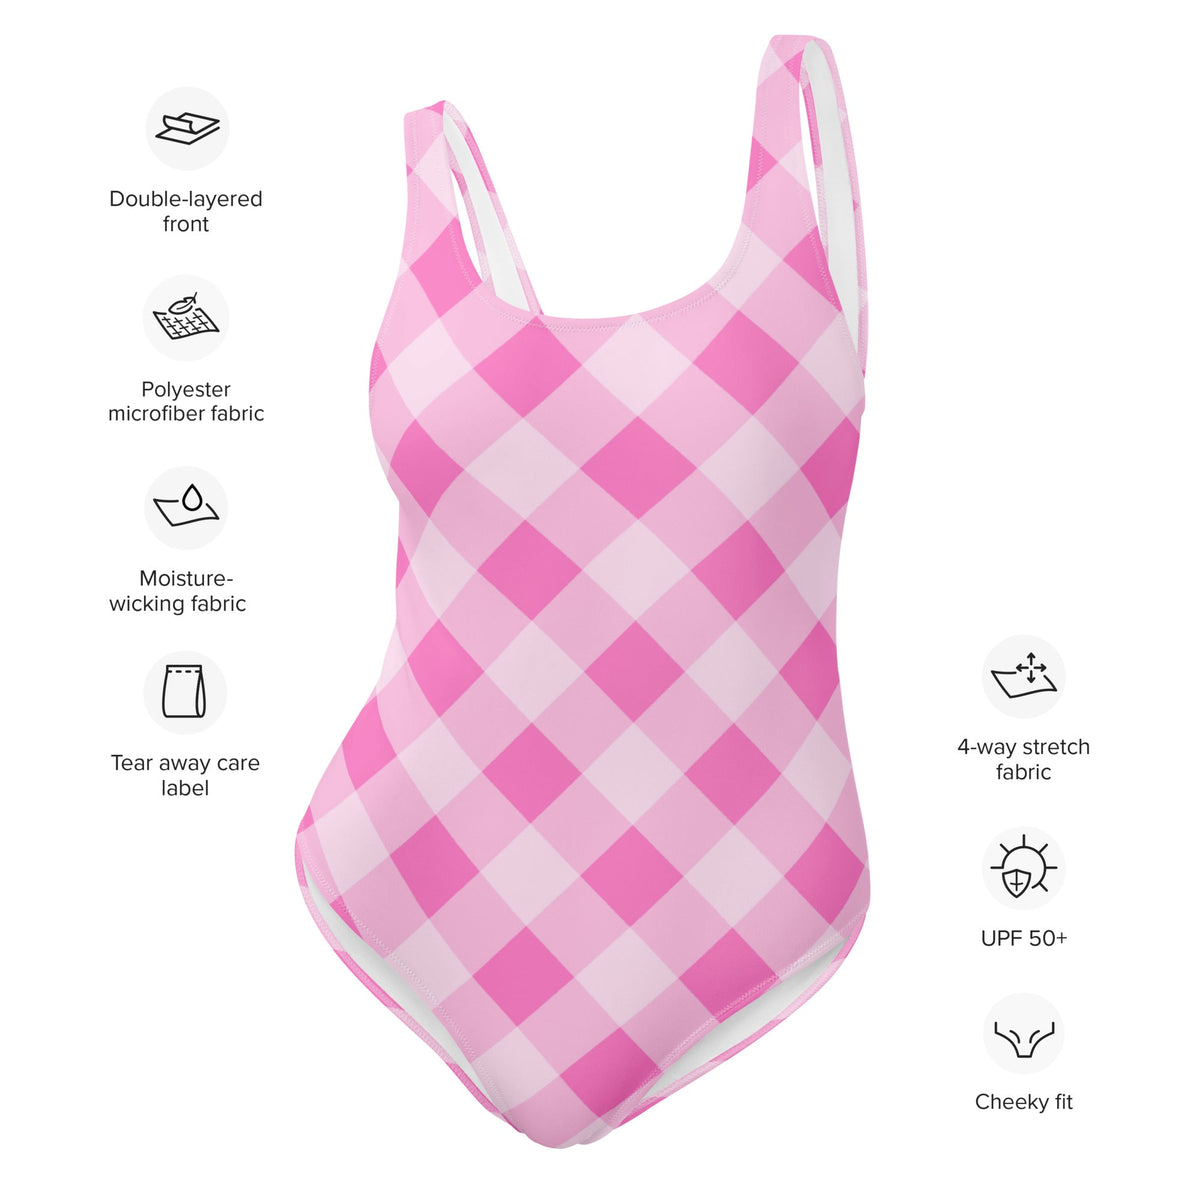 FLORIDA ECO ONE PIECE SWIMSUIT - PINK GINGHAM